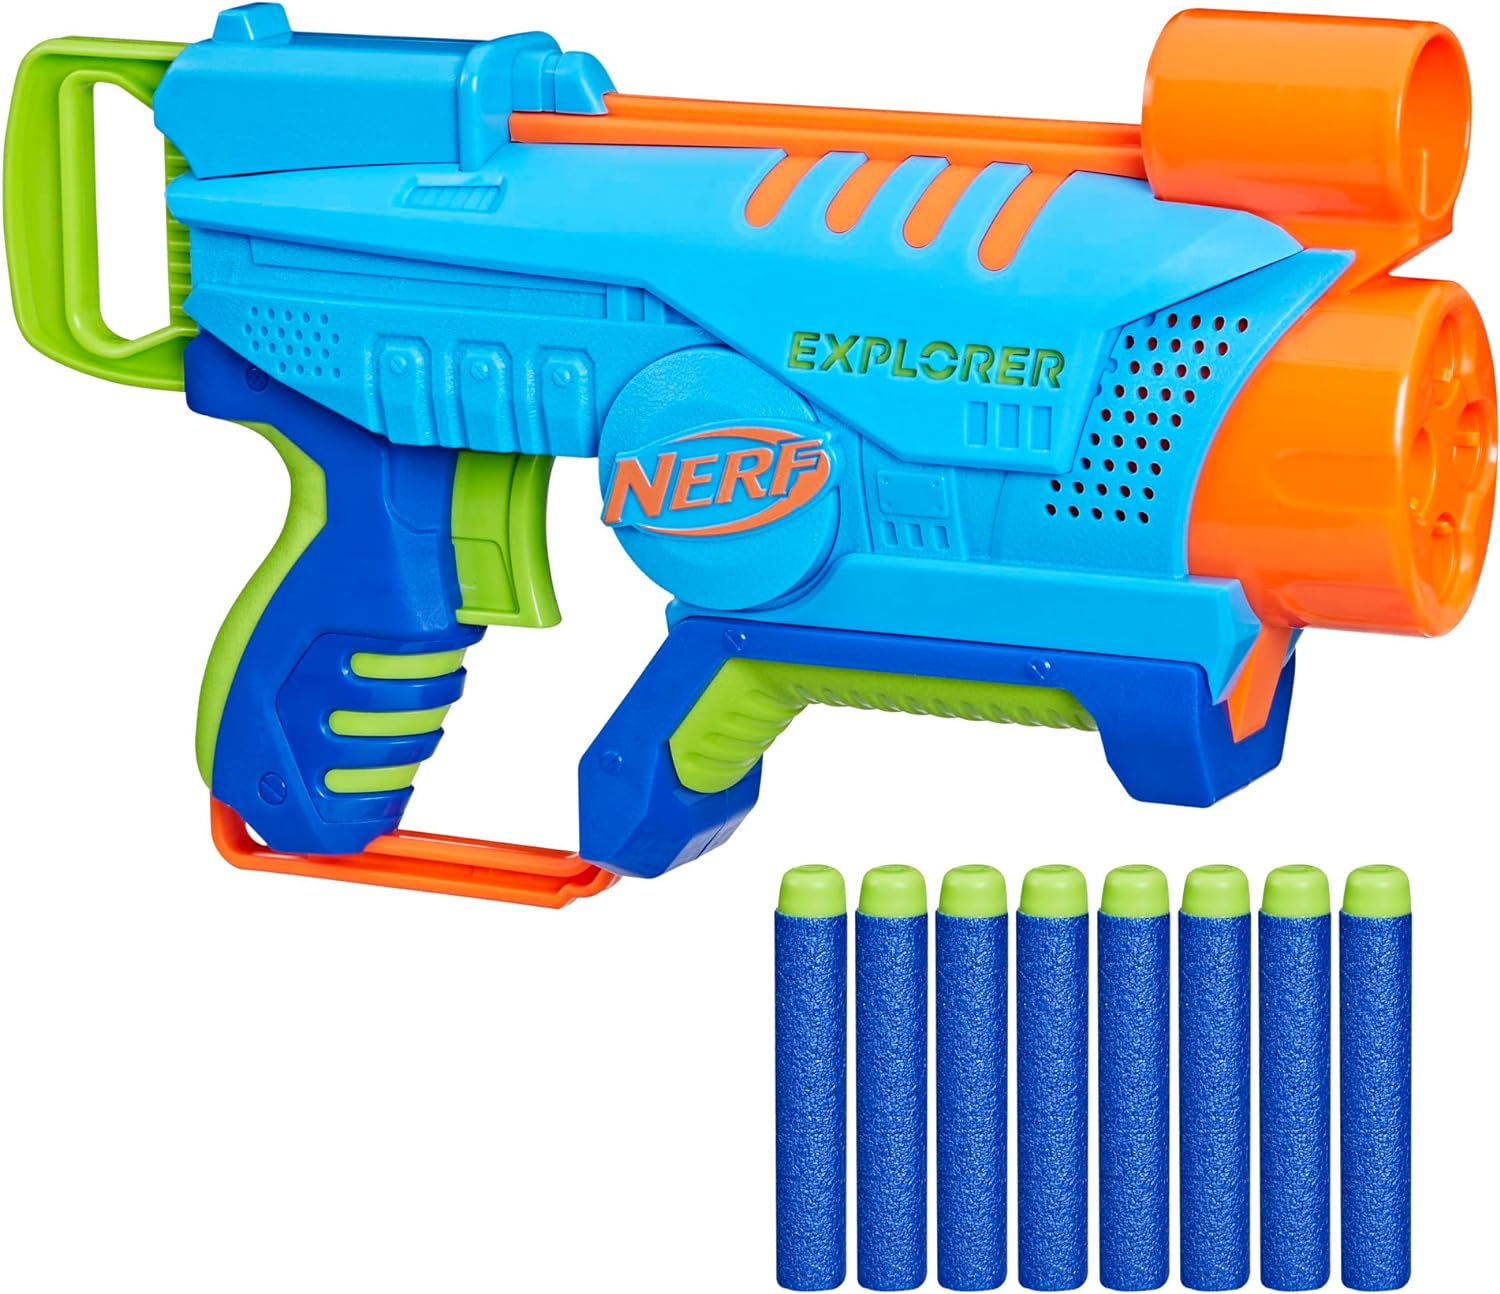 My 4.5 year old son has some friends who are older and use nerf guns but he struggled with cocking it. This gun is great. It is very easy for him manage. The bullets are just placed in the gun and then one easy pull back. He can do it all on his own which is great. The only downside is it only holds 4 bullets so a lot of reloading but it works great for his age.